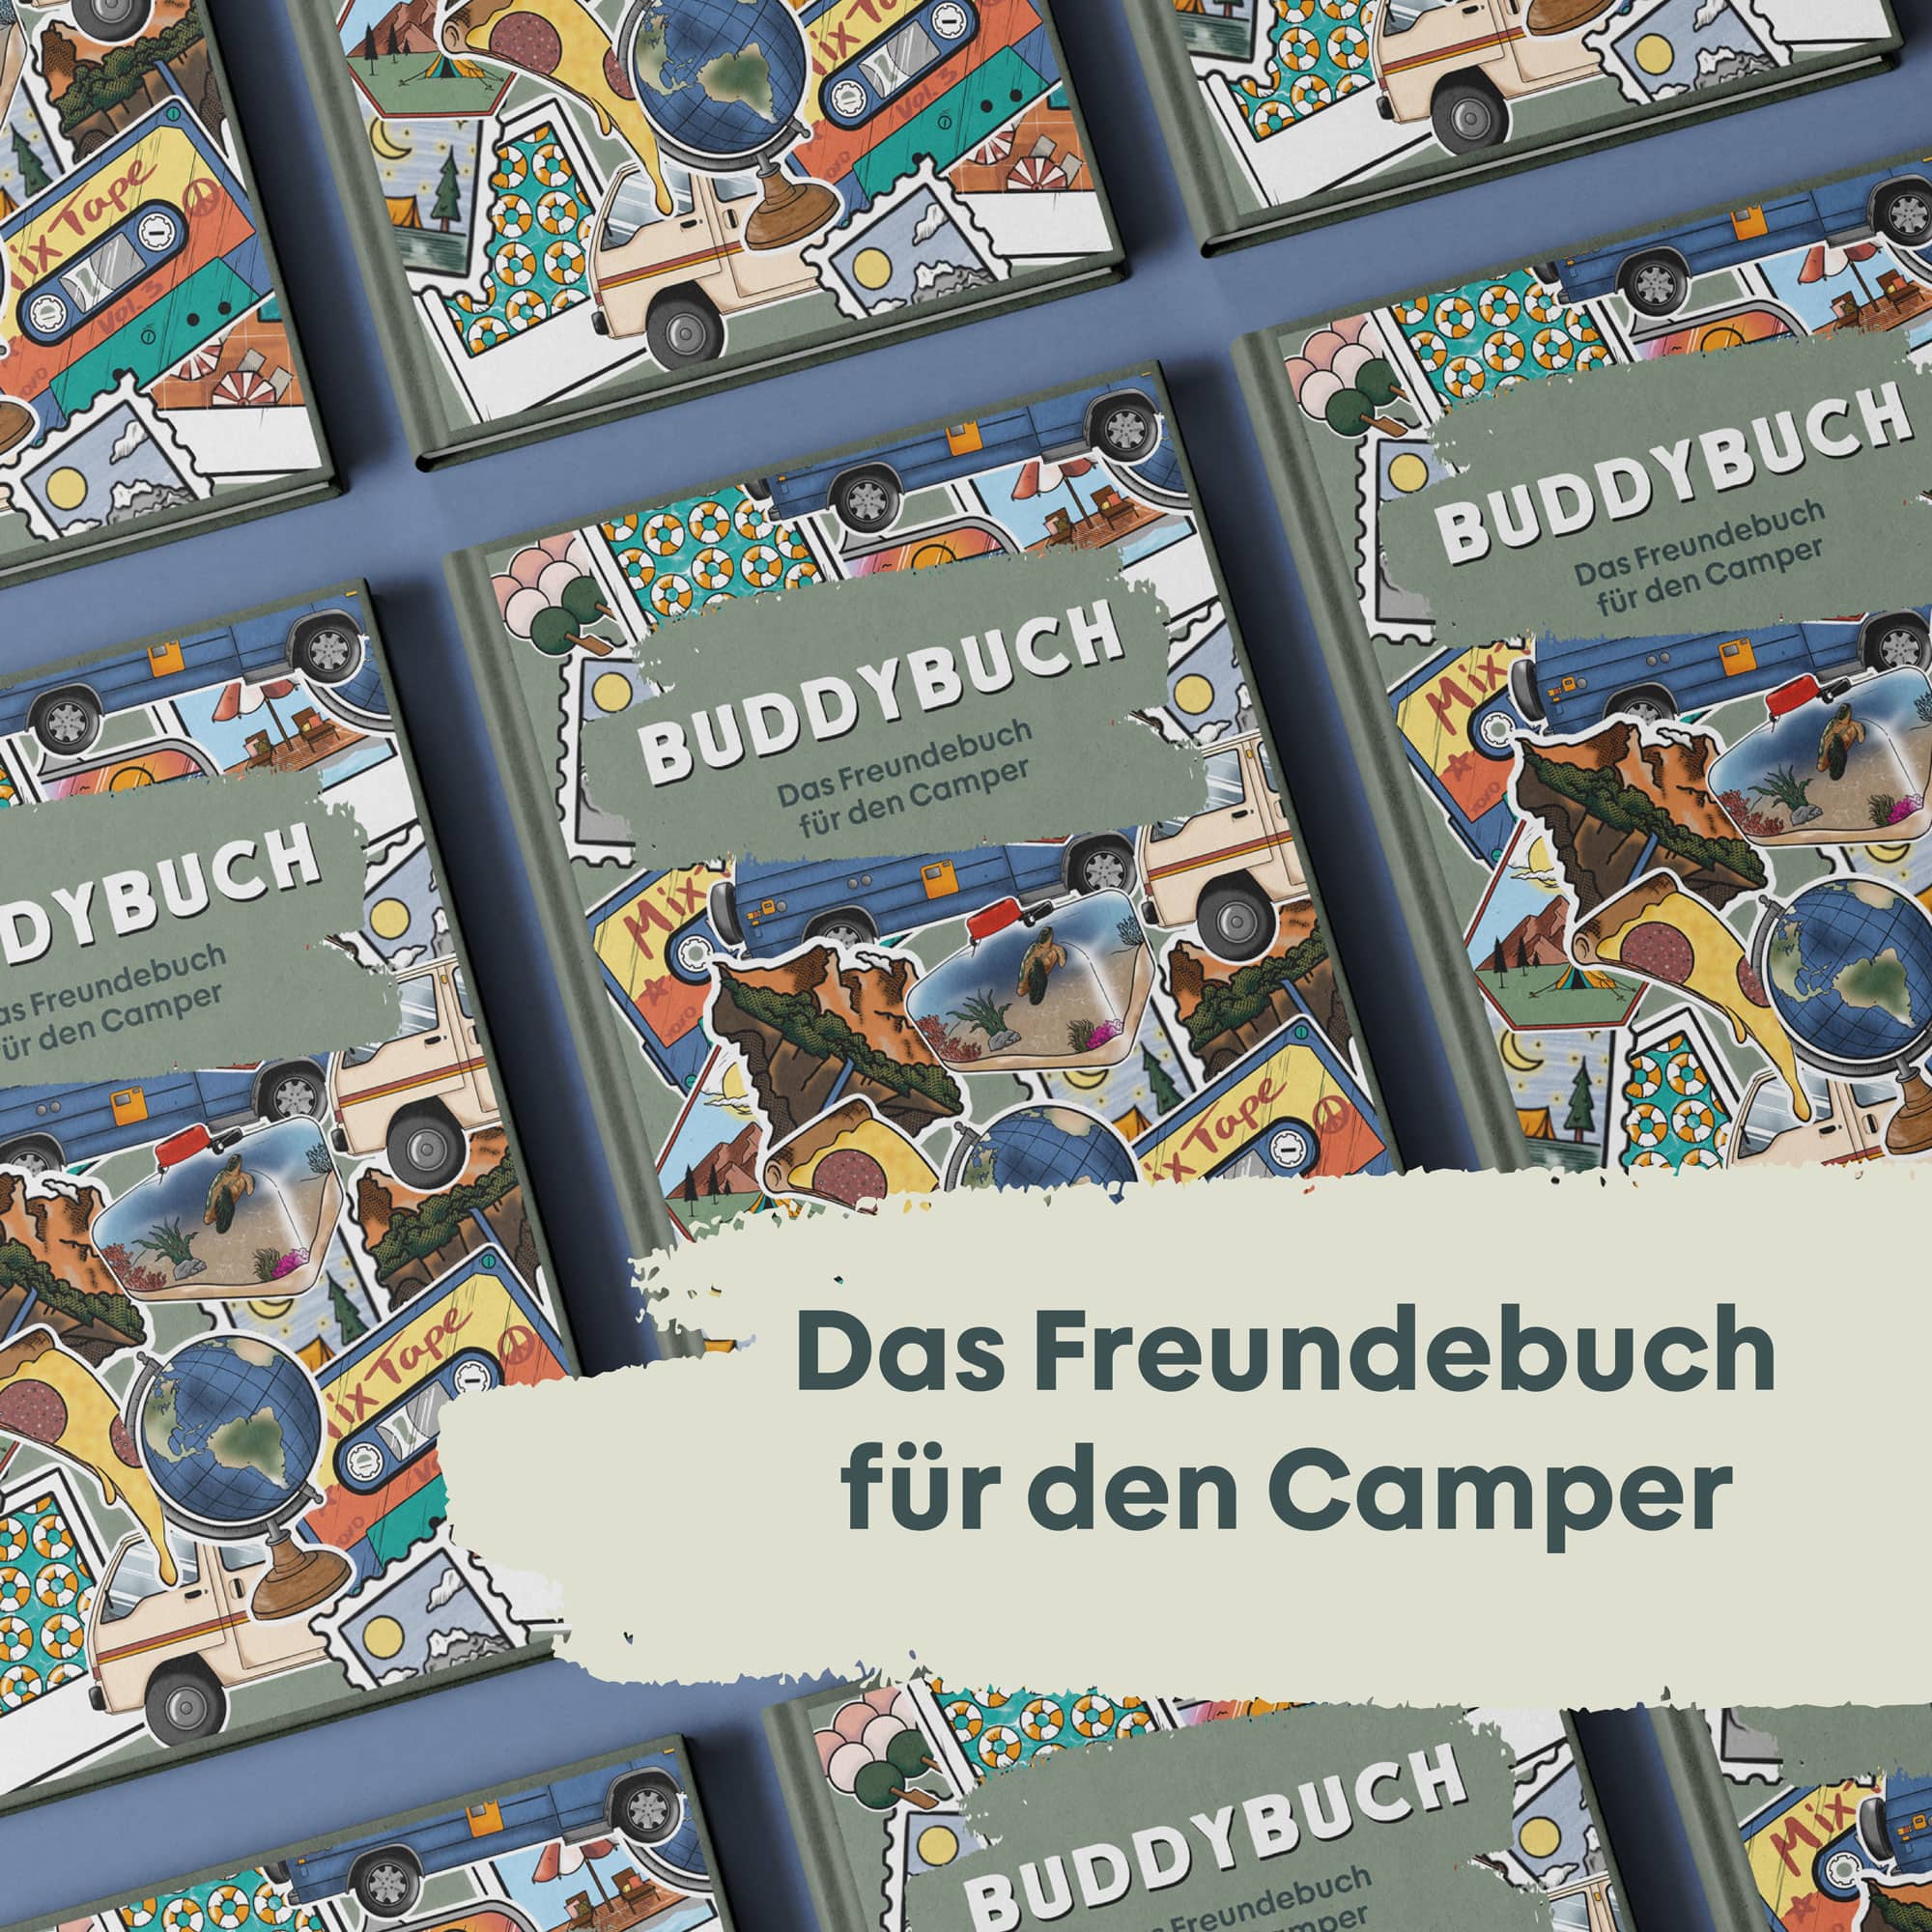 BUDDYBUCH - The friends book for campers